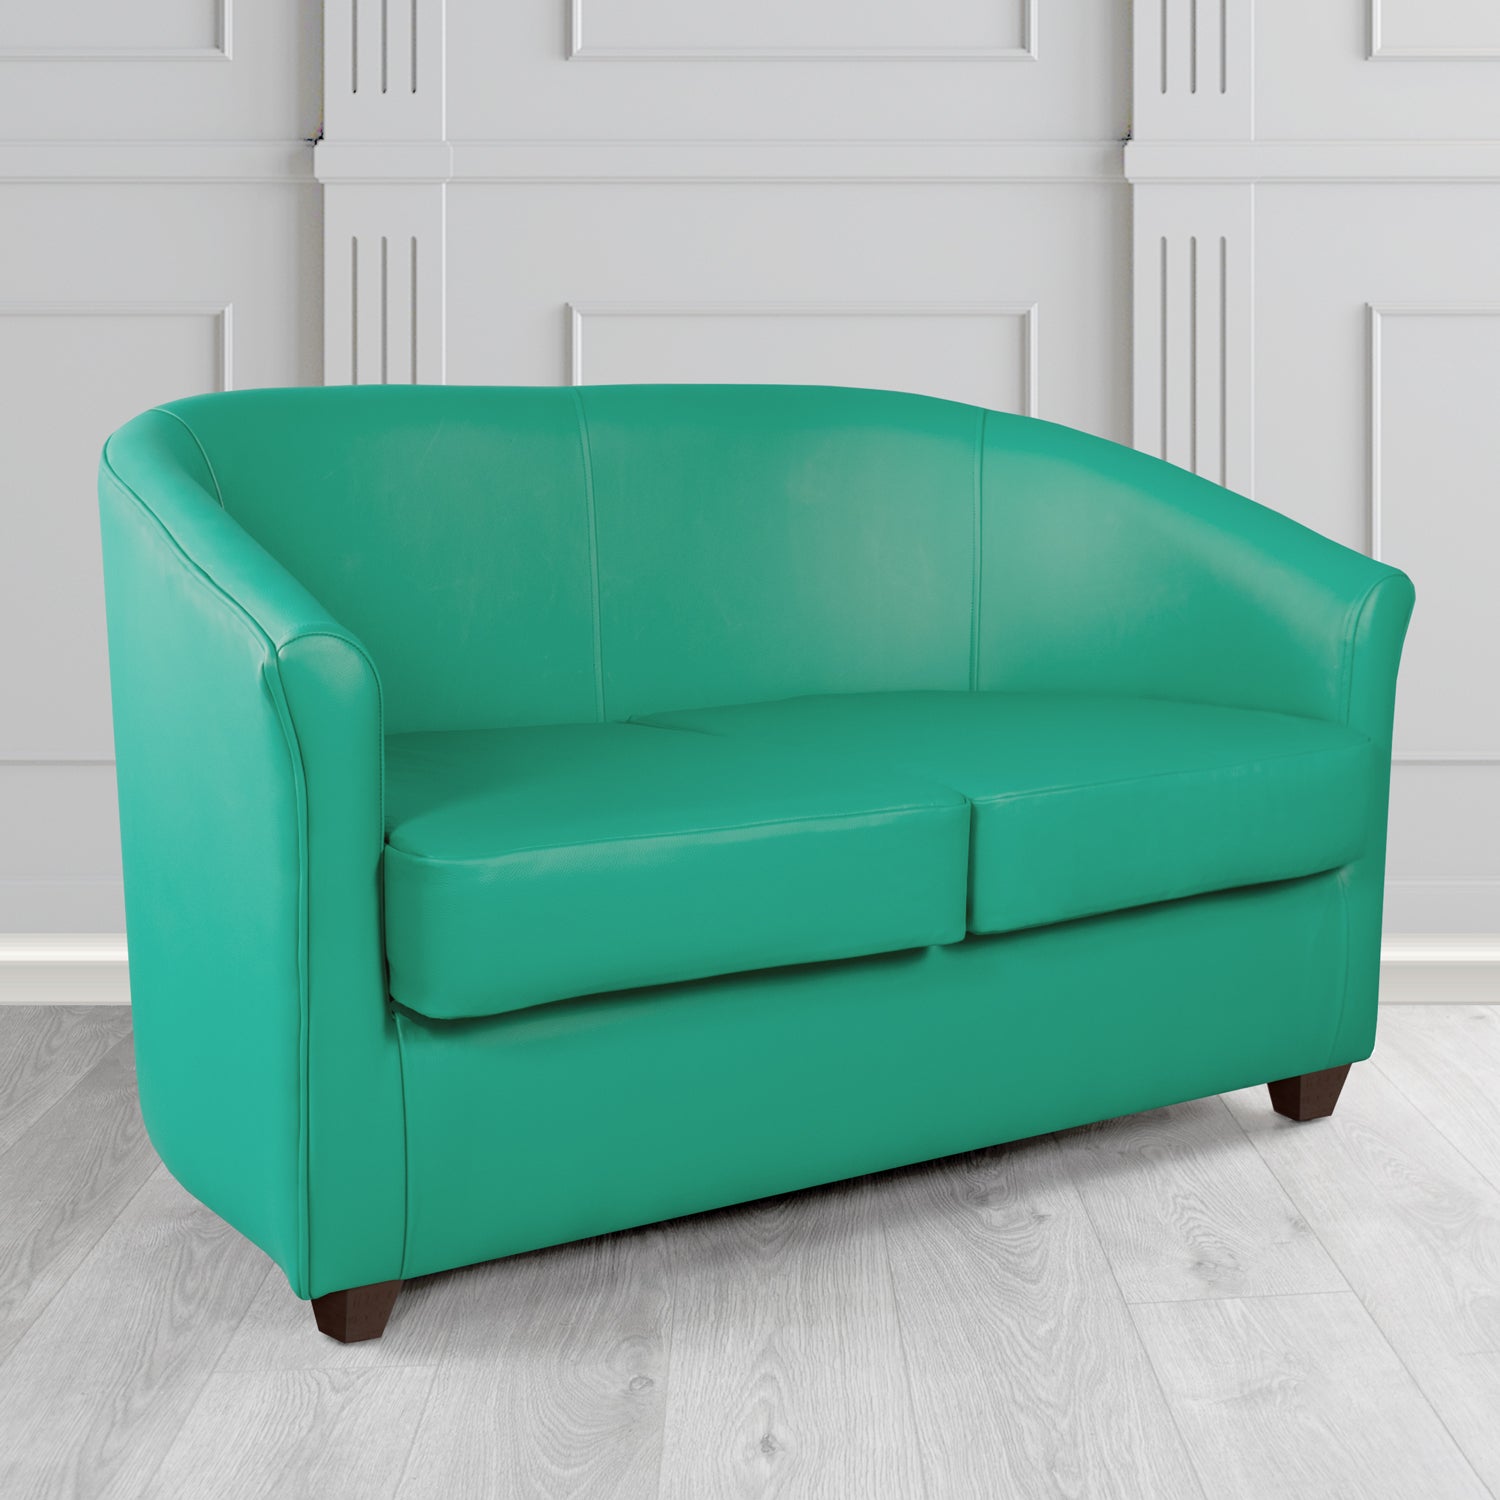 Cannes 2 Seater Tub Sofa in Just Colour Sea Green Crib 5 Faux Leather - The Tub Chair Shop